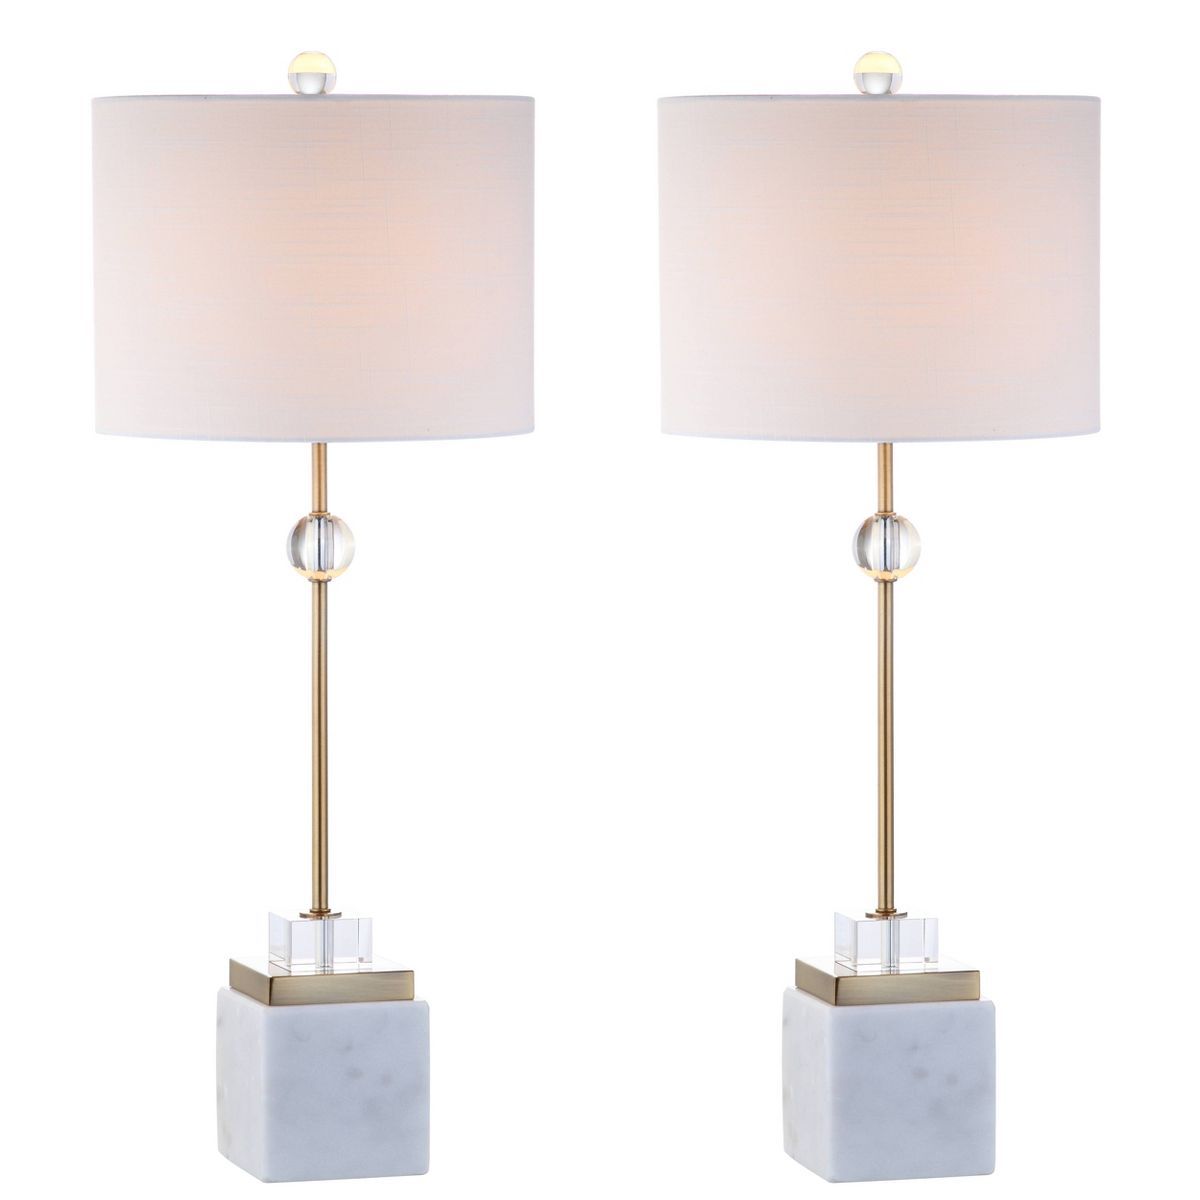 30" (Set of 2) Dawson Marble/Crystal Table Lamp (Includes LED Light Bulb) White - JONATHAN Y | Target